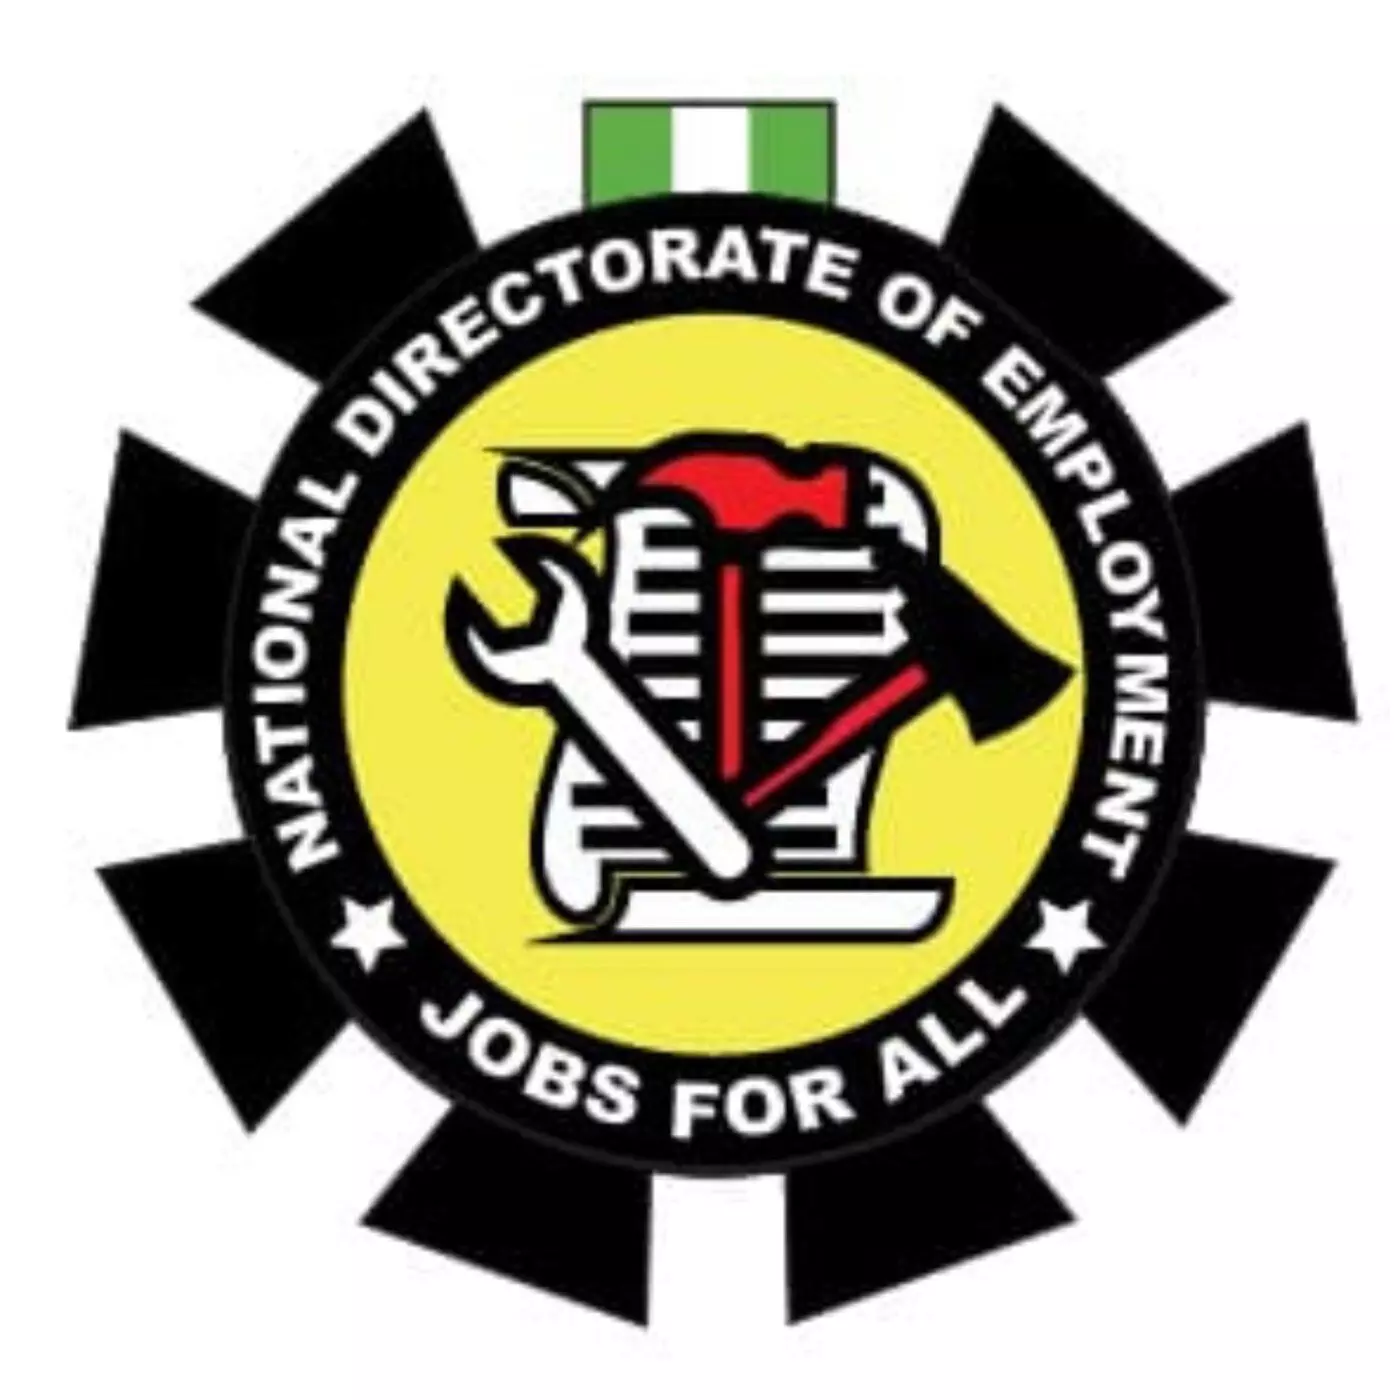 FG committed to equipping young people with skills - NDE